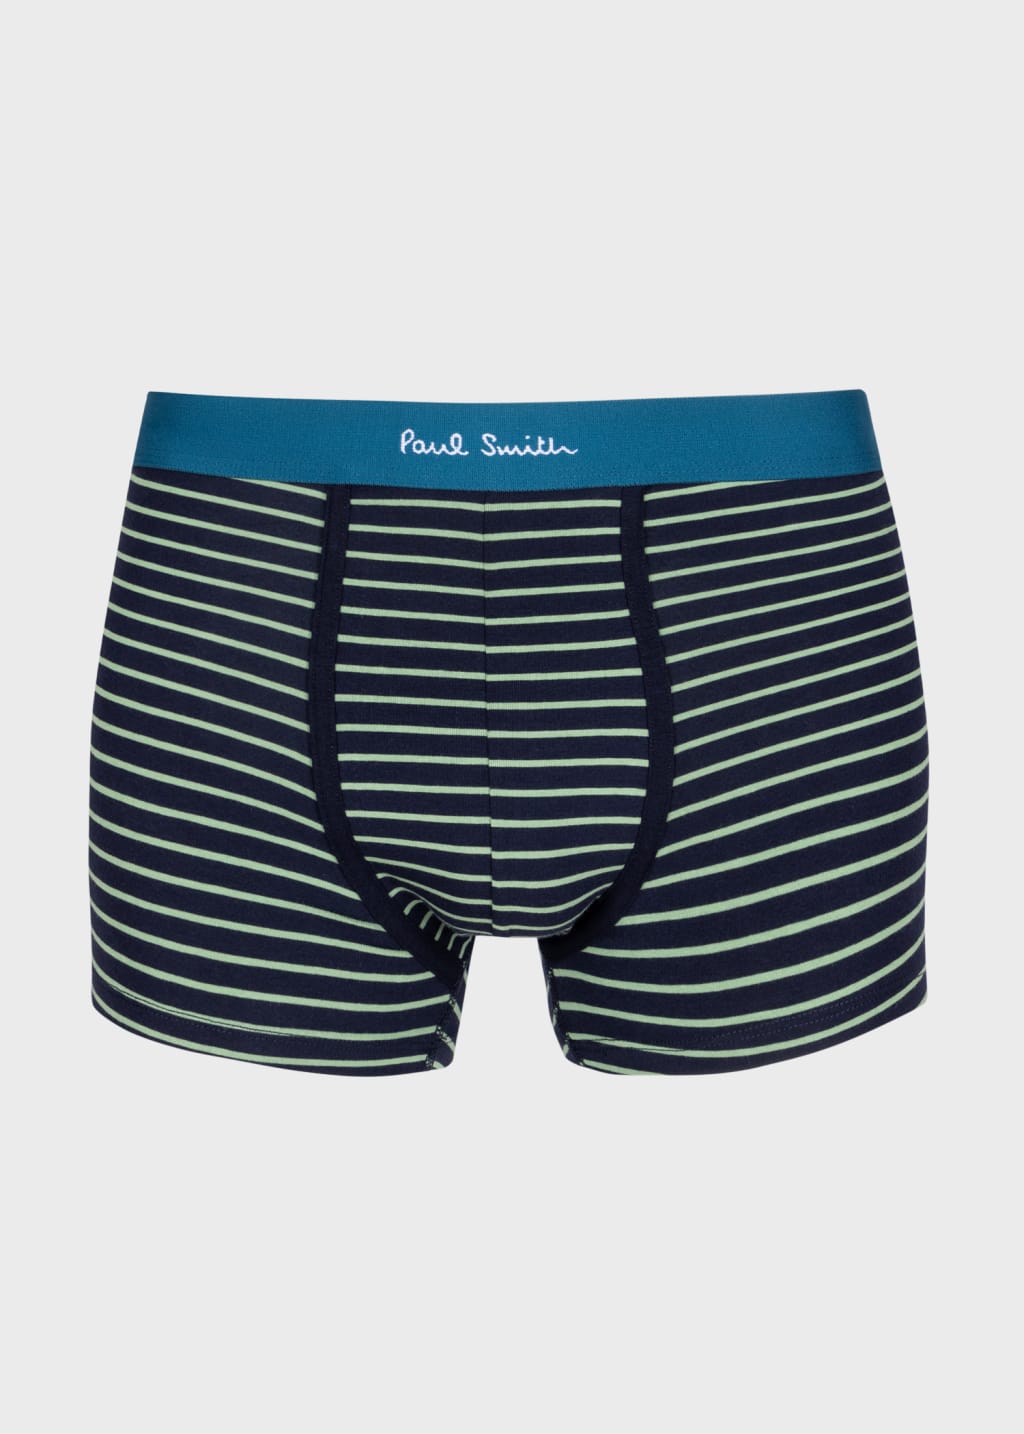 Product view - Mixed Boxer Shorts Five Pack